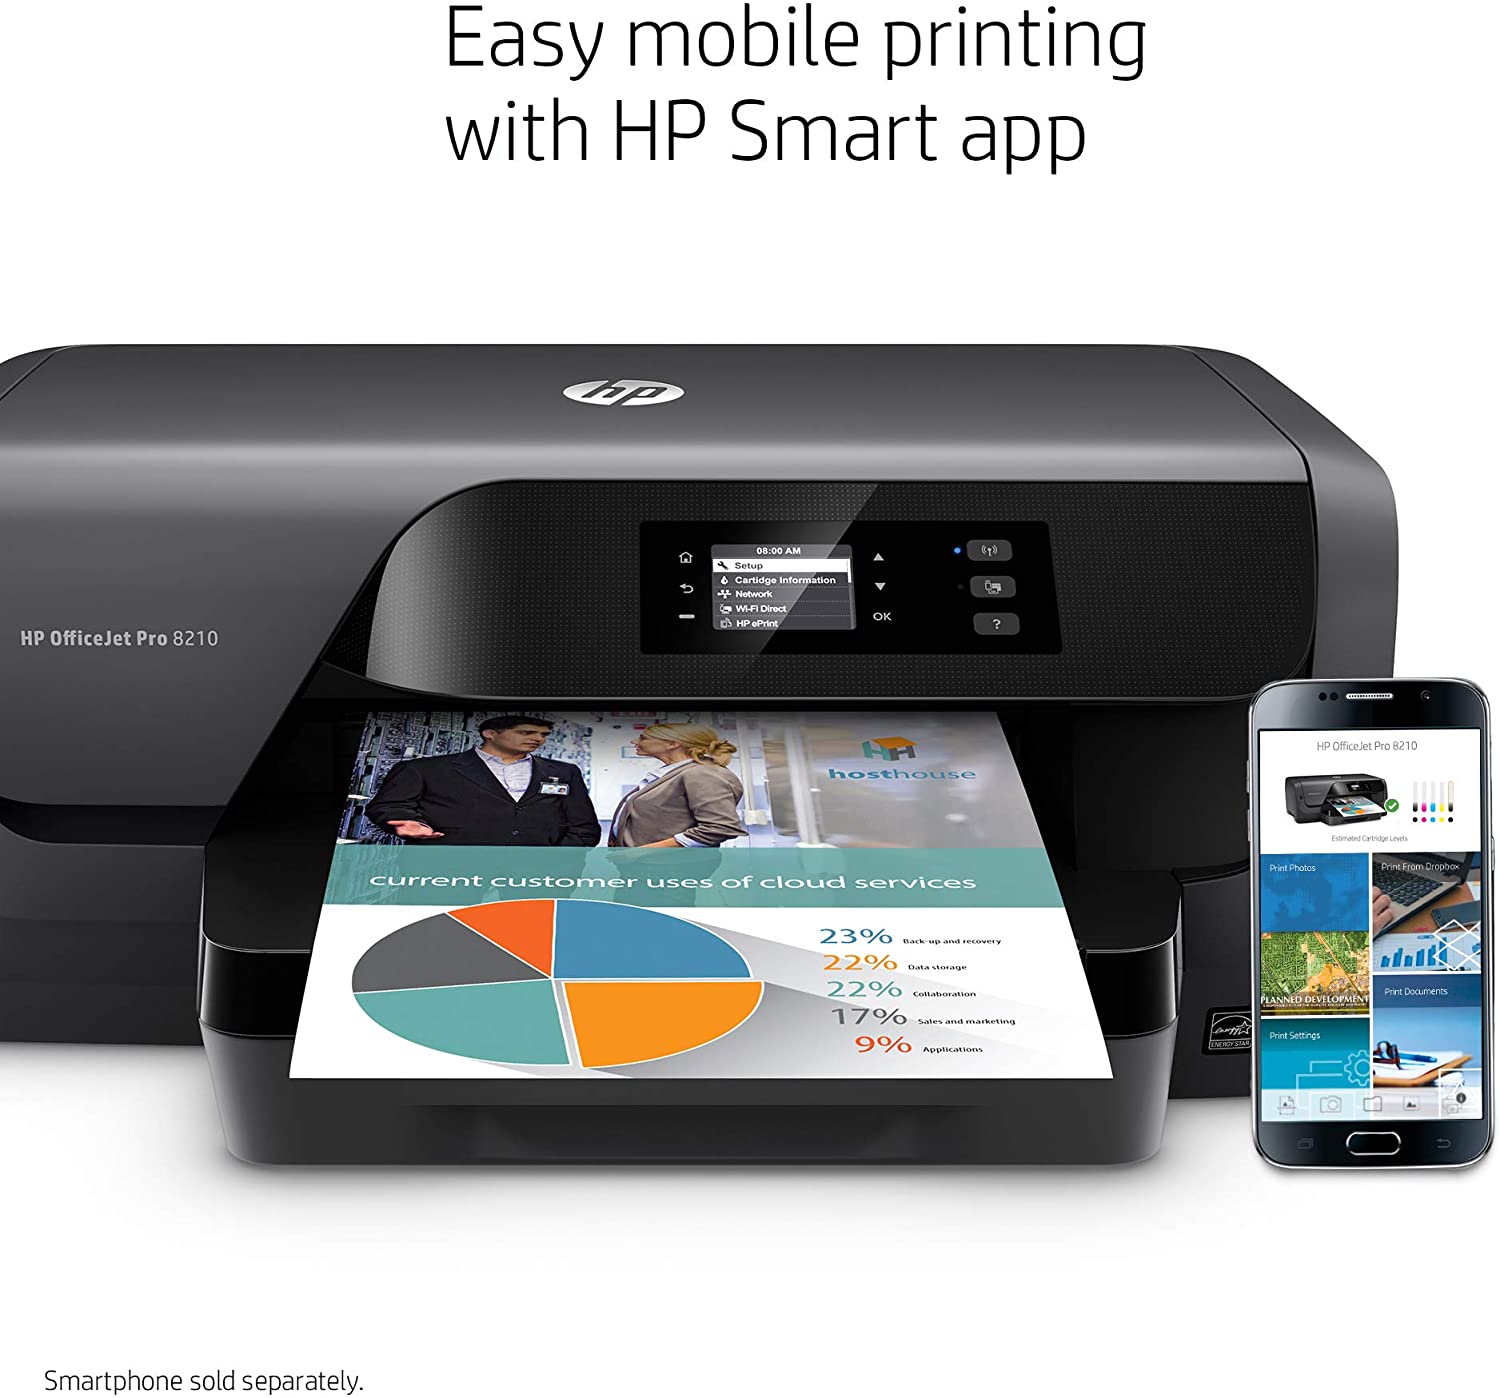 HP OfficeJet Pro 8210 Wireless Color Printer, HP Instant Ink Ready (D9L64A#B1H)